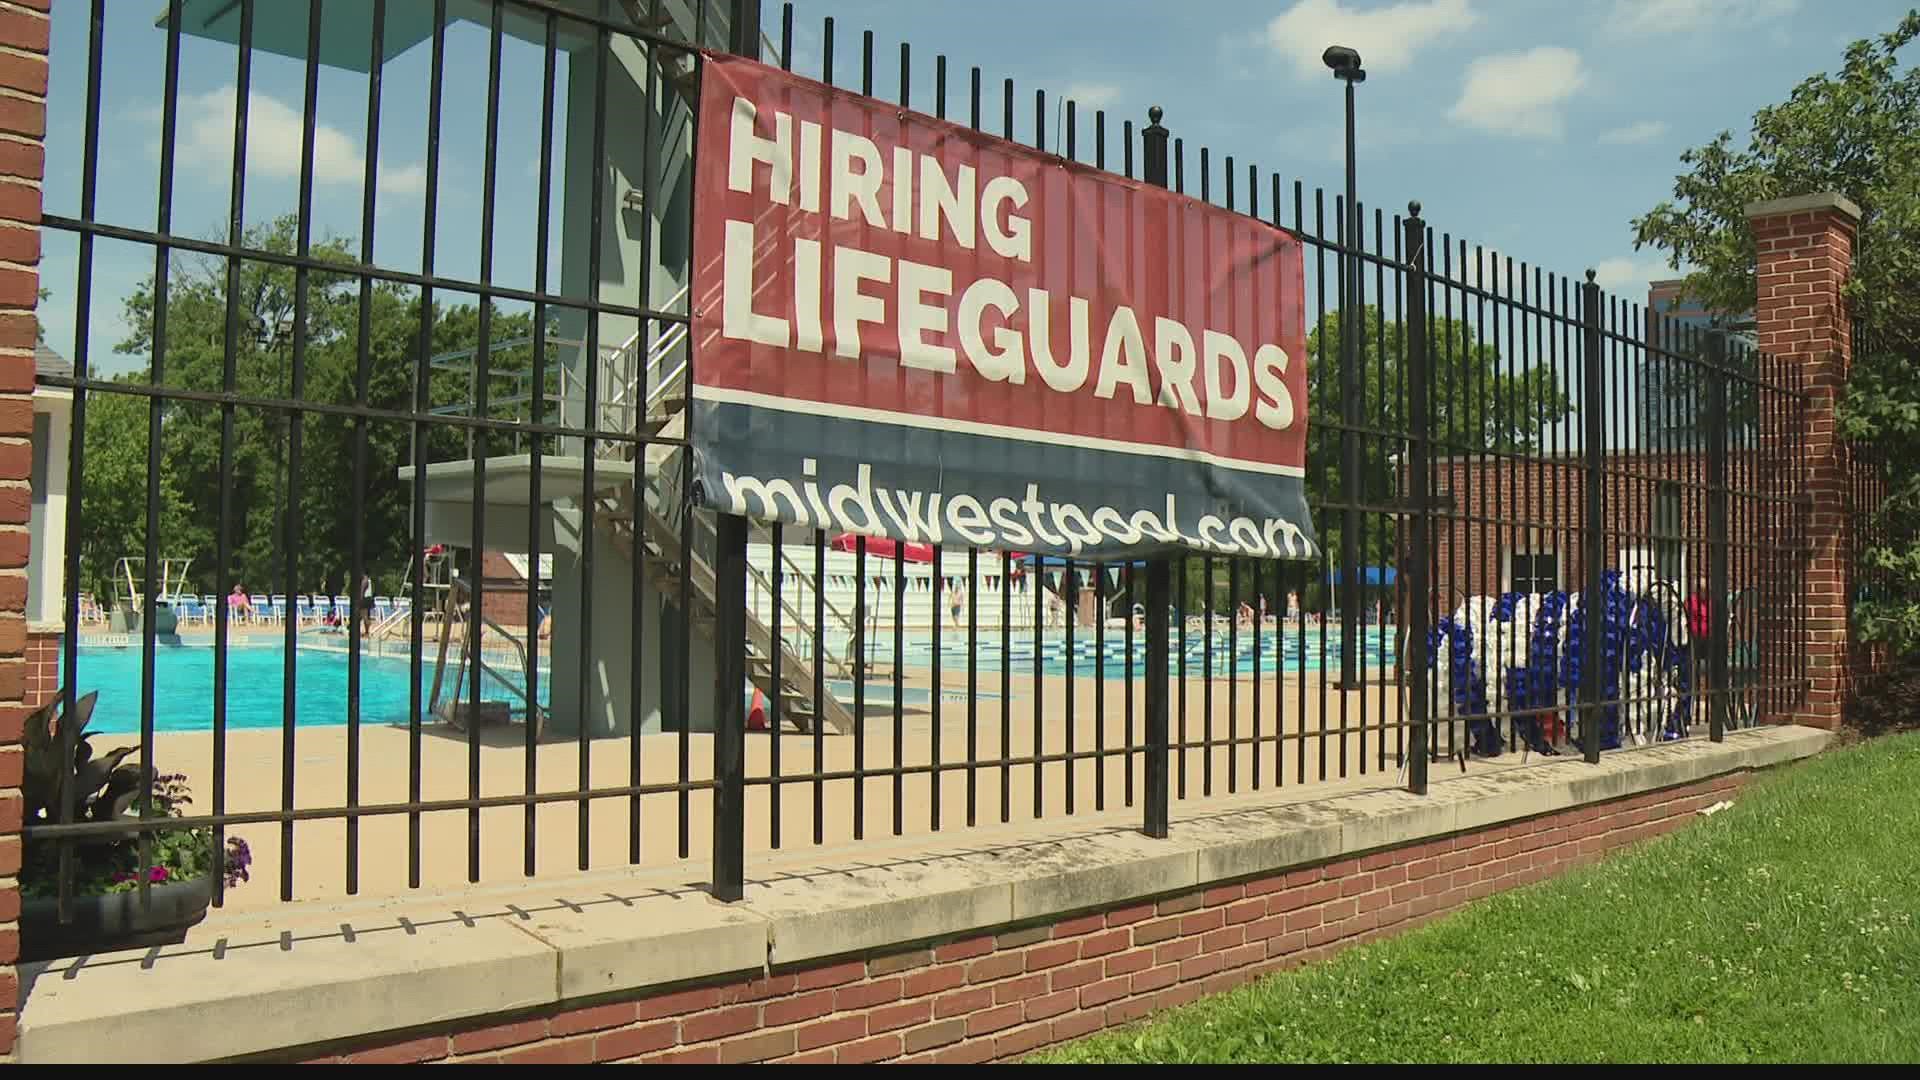 Hot days make great pool days. Between community pools and water parks, there are lots of spots to cool down, and nearly all of them are looking for lifeguards.